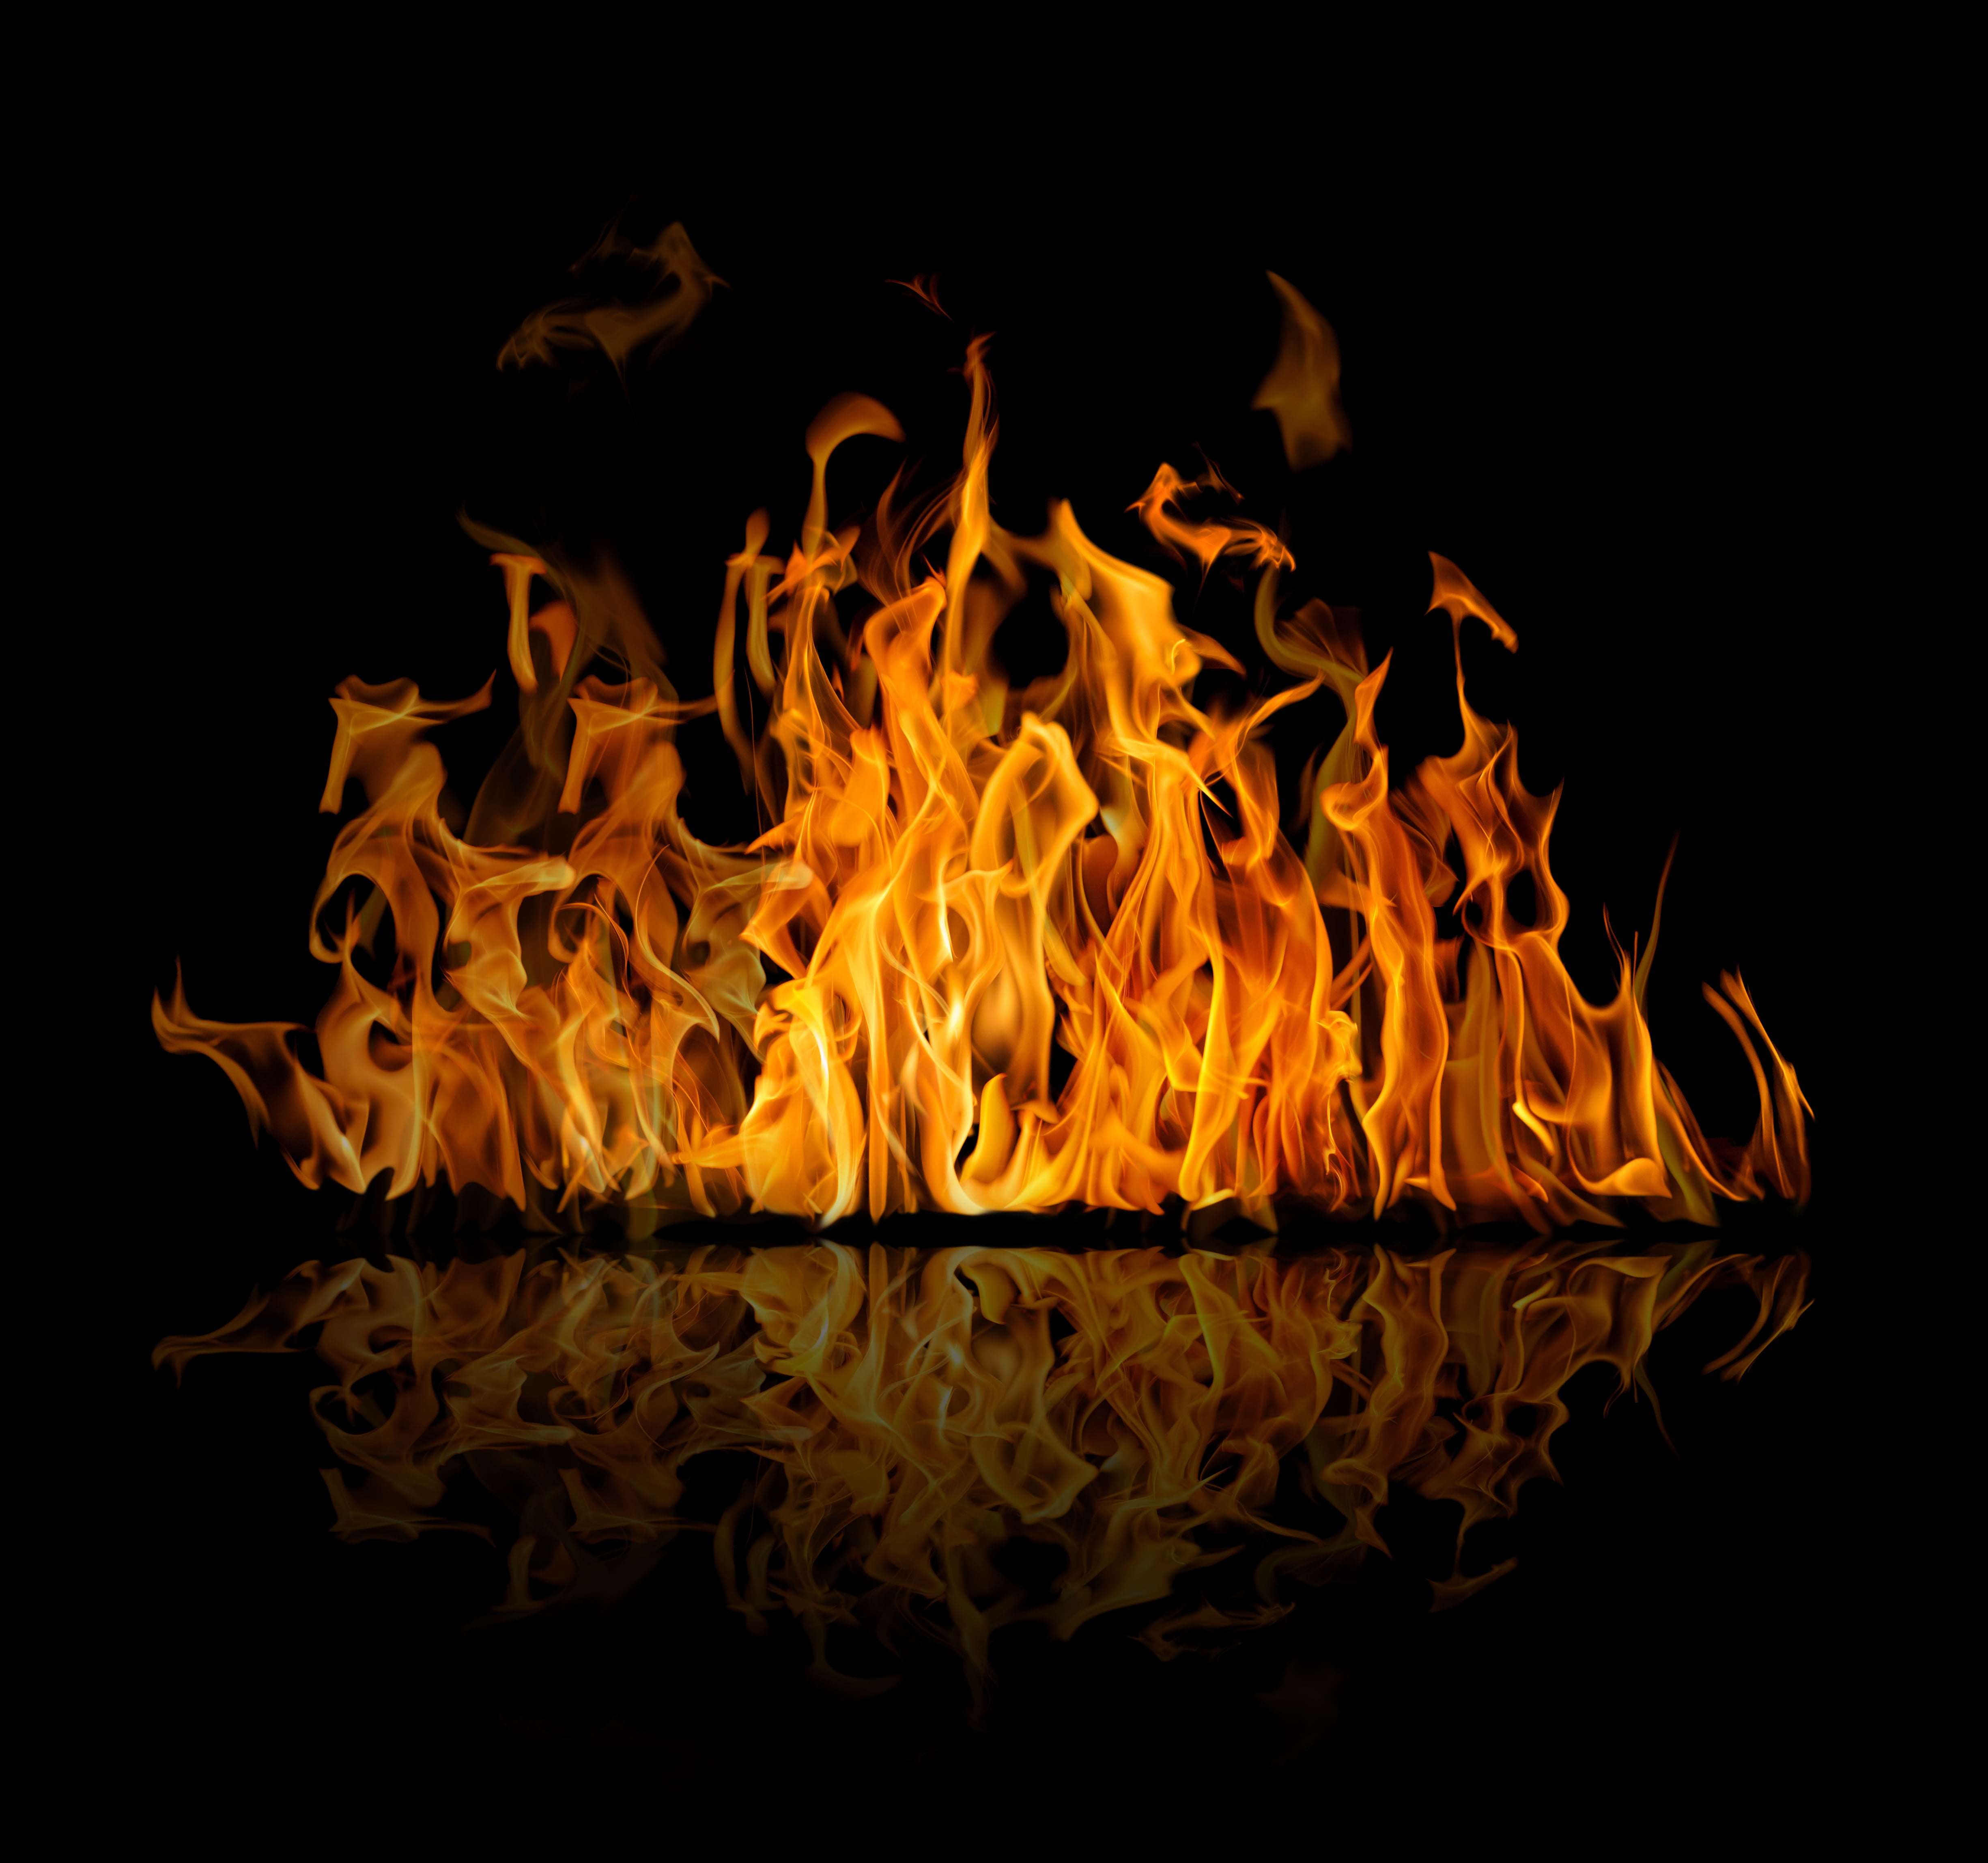 red flame, reflection, background, fire, black, burning, heat - temperature